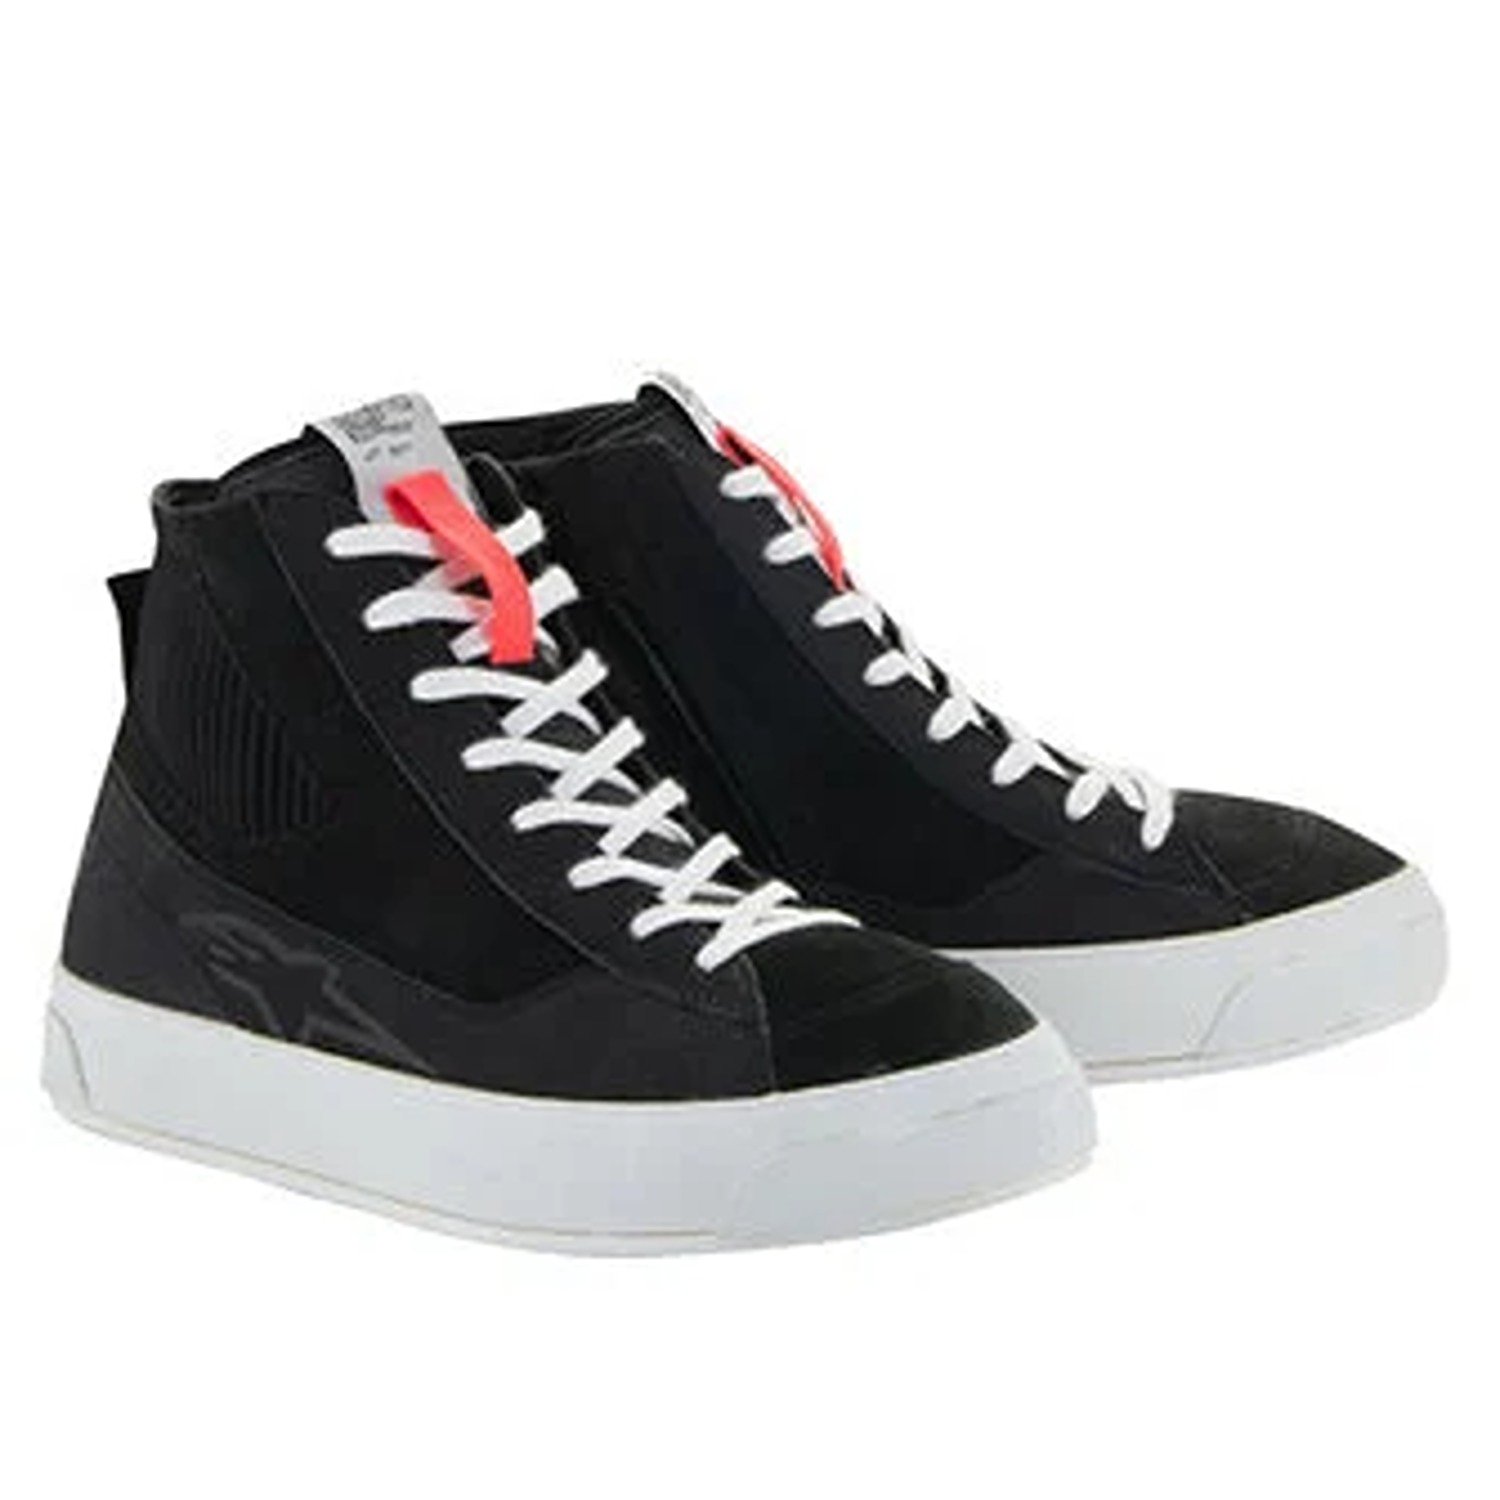 Image of EU Alpinestars Stated Shoes Black Taille US 13